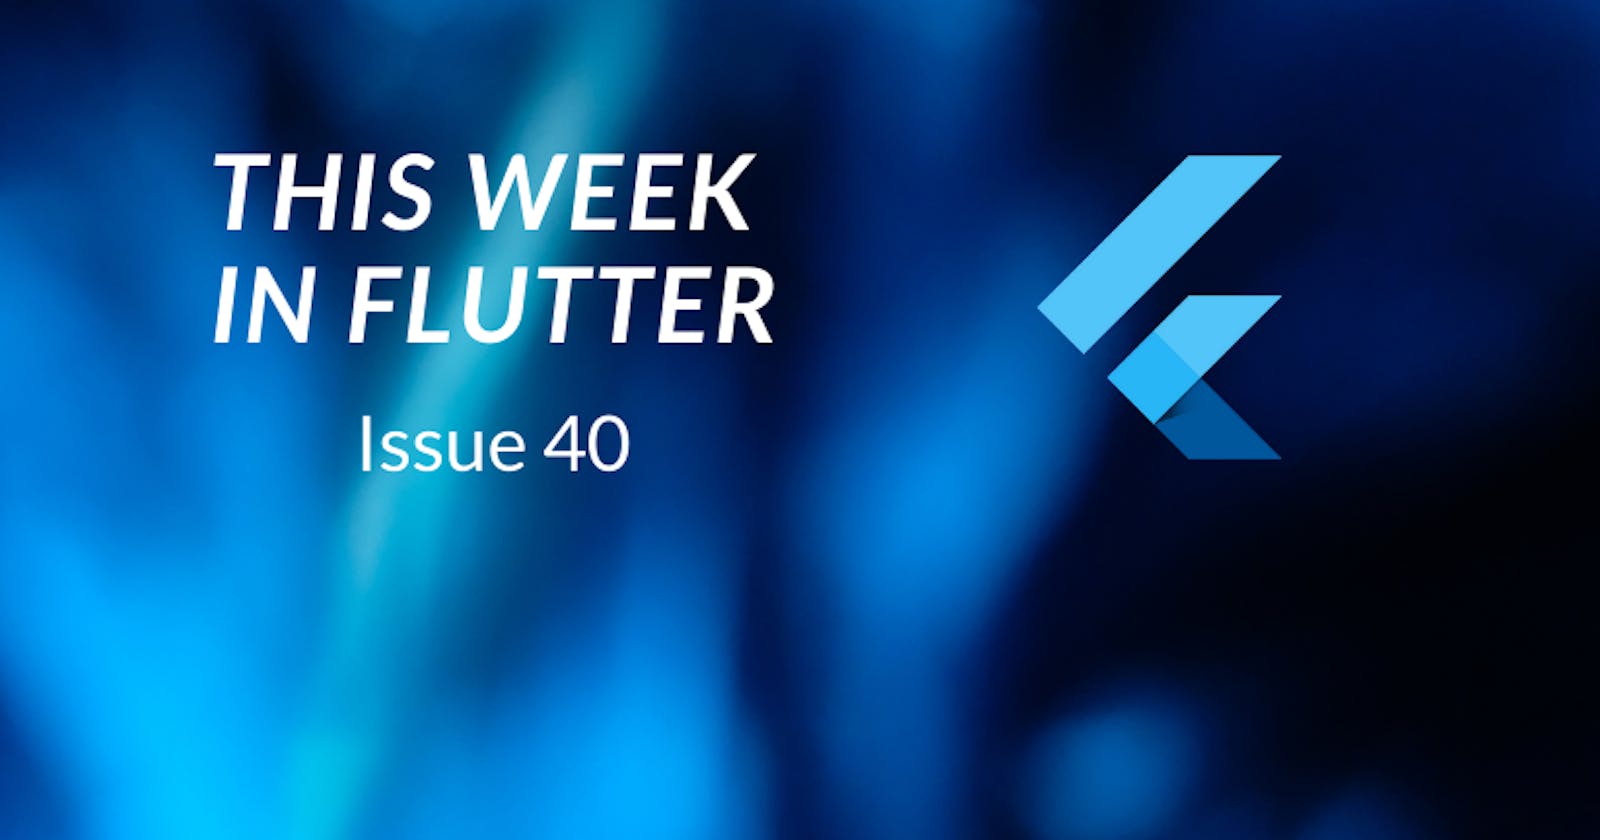 This week in Flutter #40